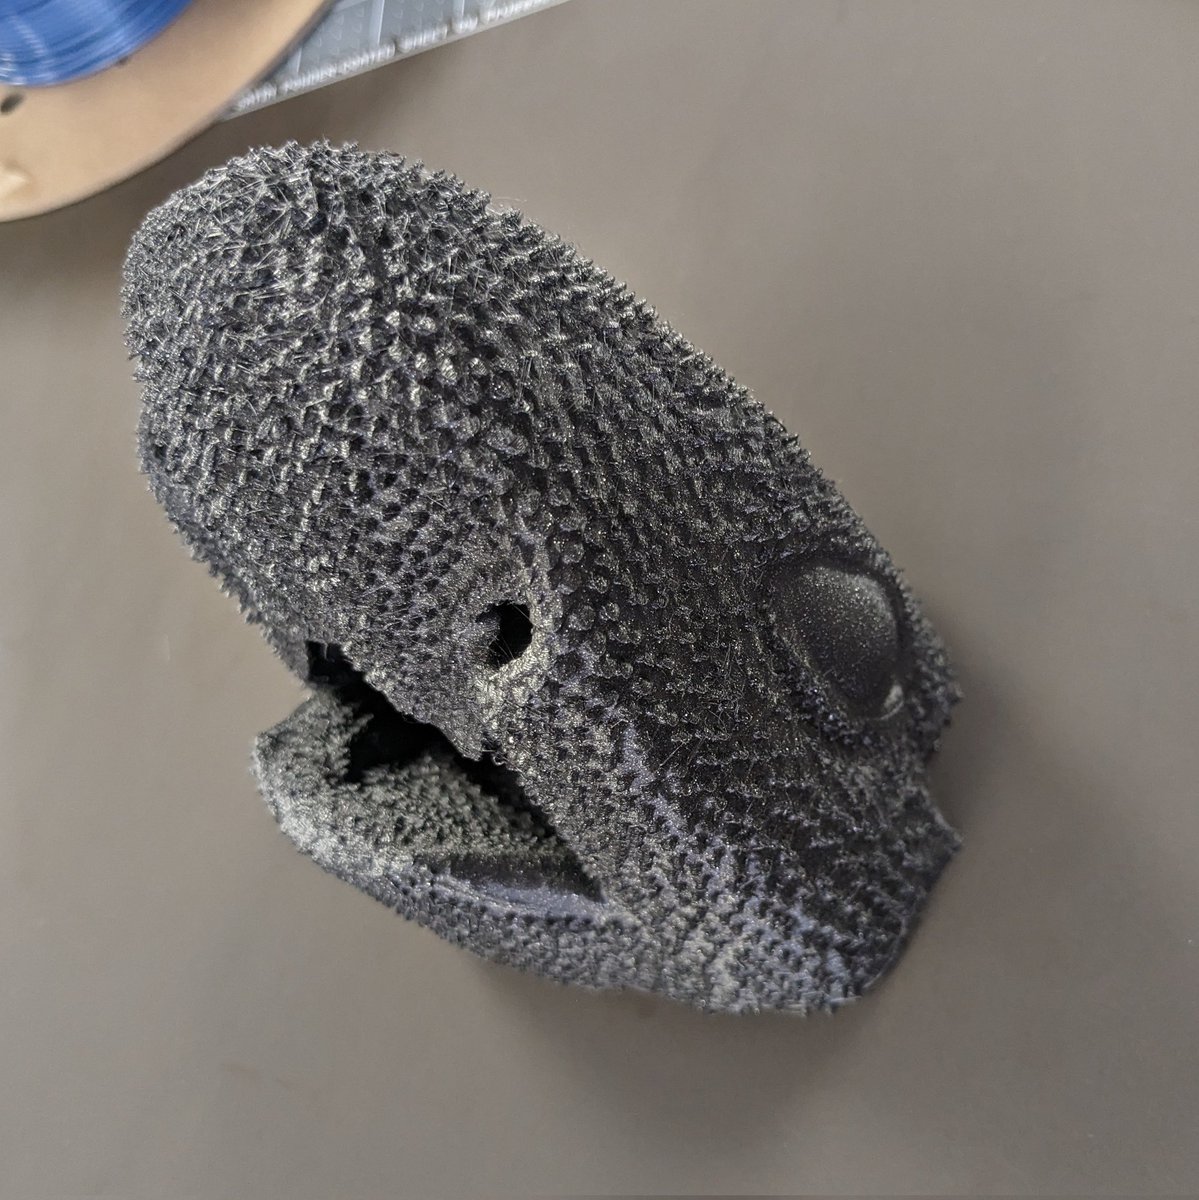 We 3D-printed the entire head of an embryo catshark (Scyliorhinus canicula) - complete with its skin-teeth, at the MakerSpace @uflib! Printed at 300% this is way larger than the adult head! 🔥 #shark #3D #3Dprinted 🦈🦈🦈